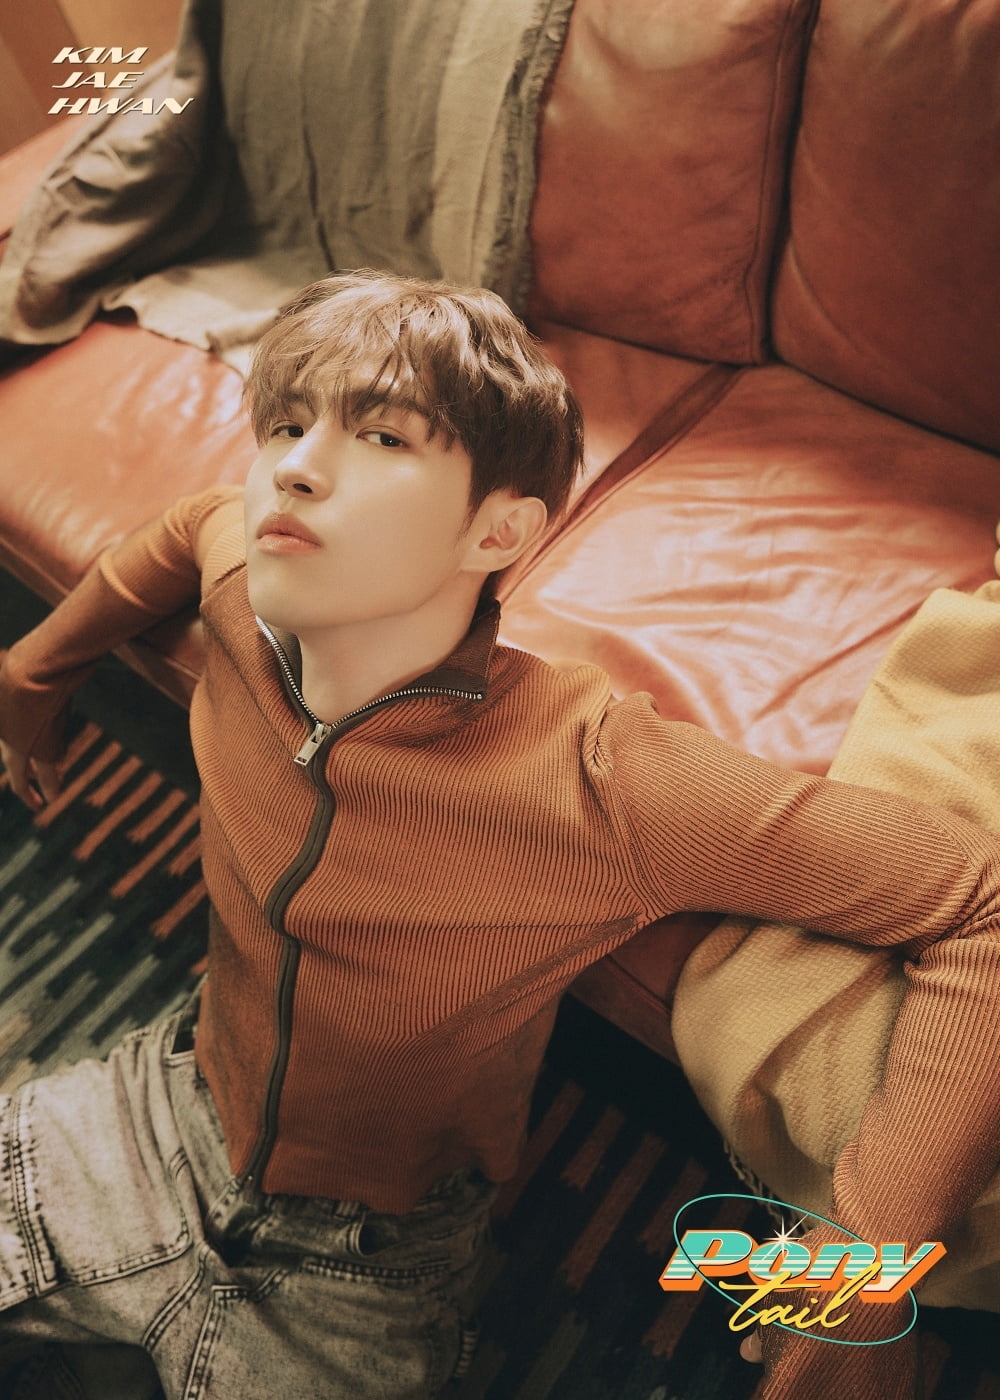 Kim Jae-hwan's first concept photo released